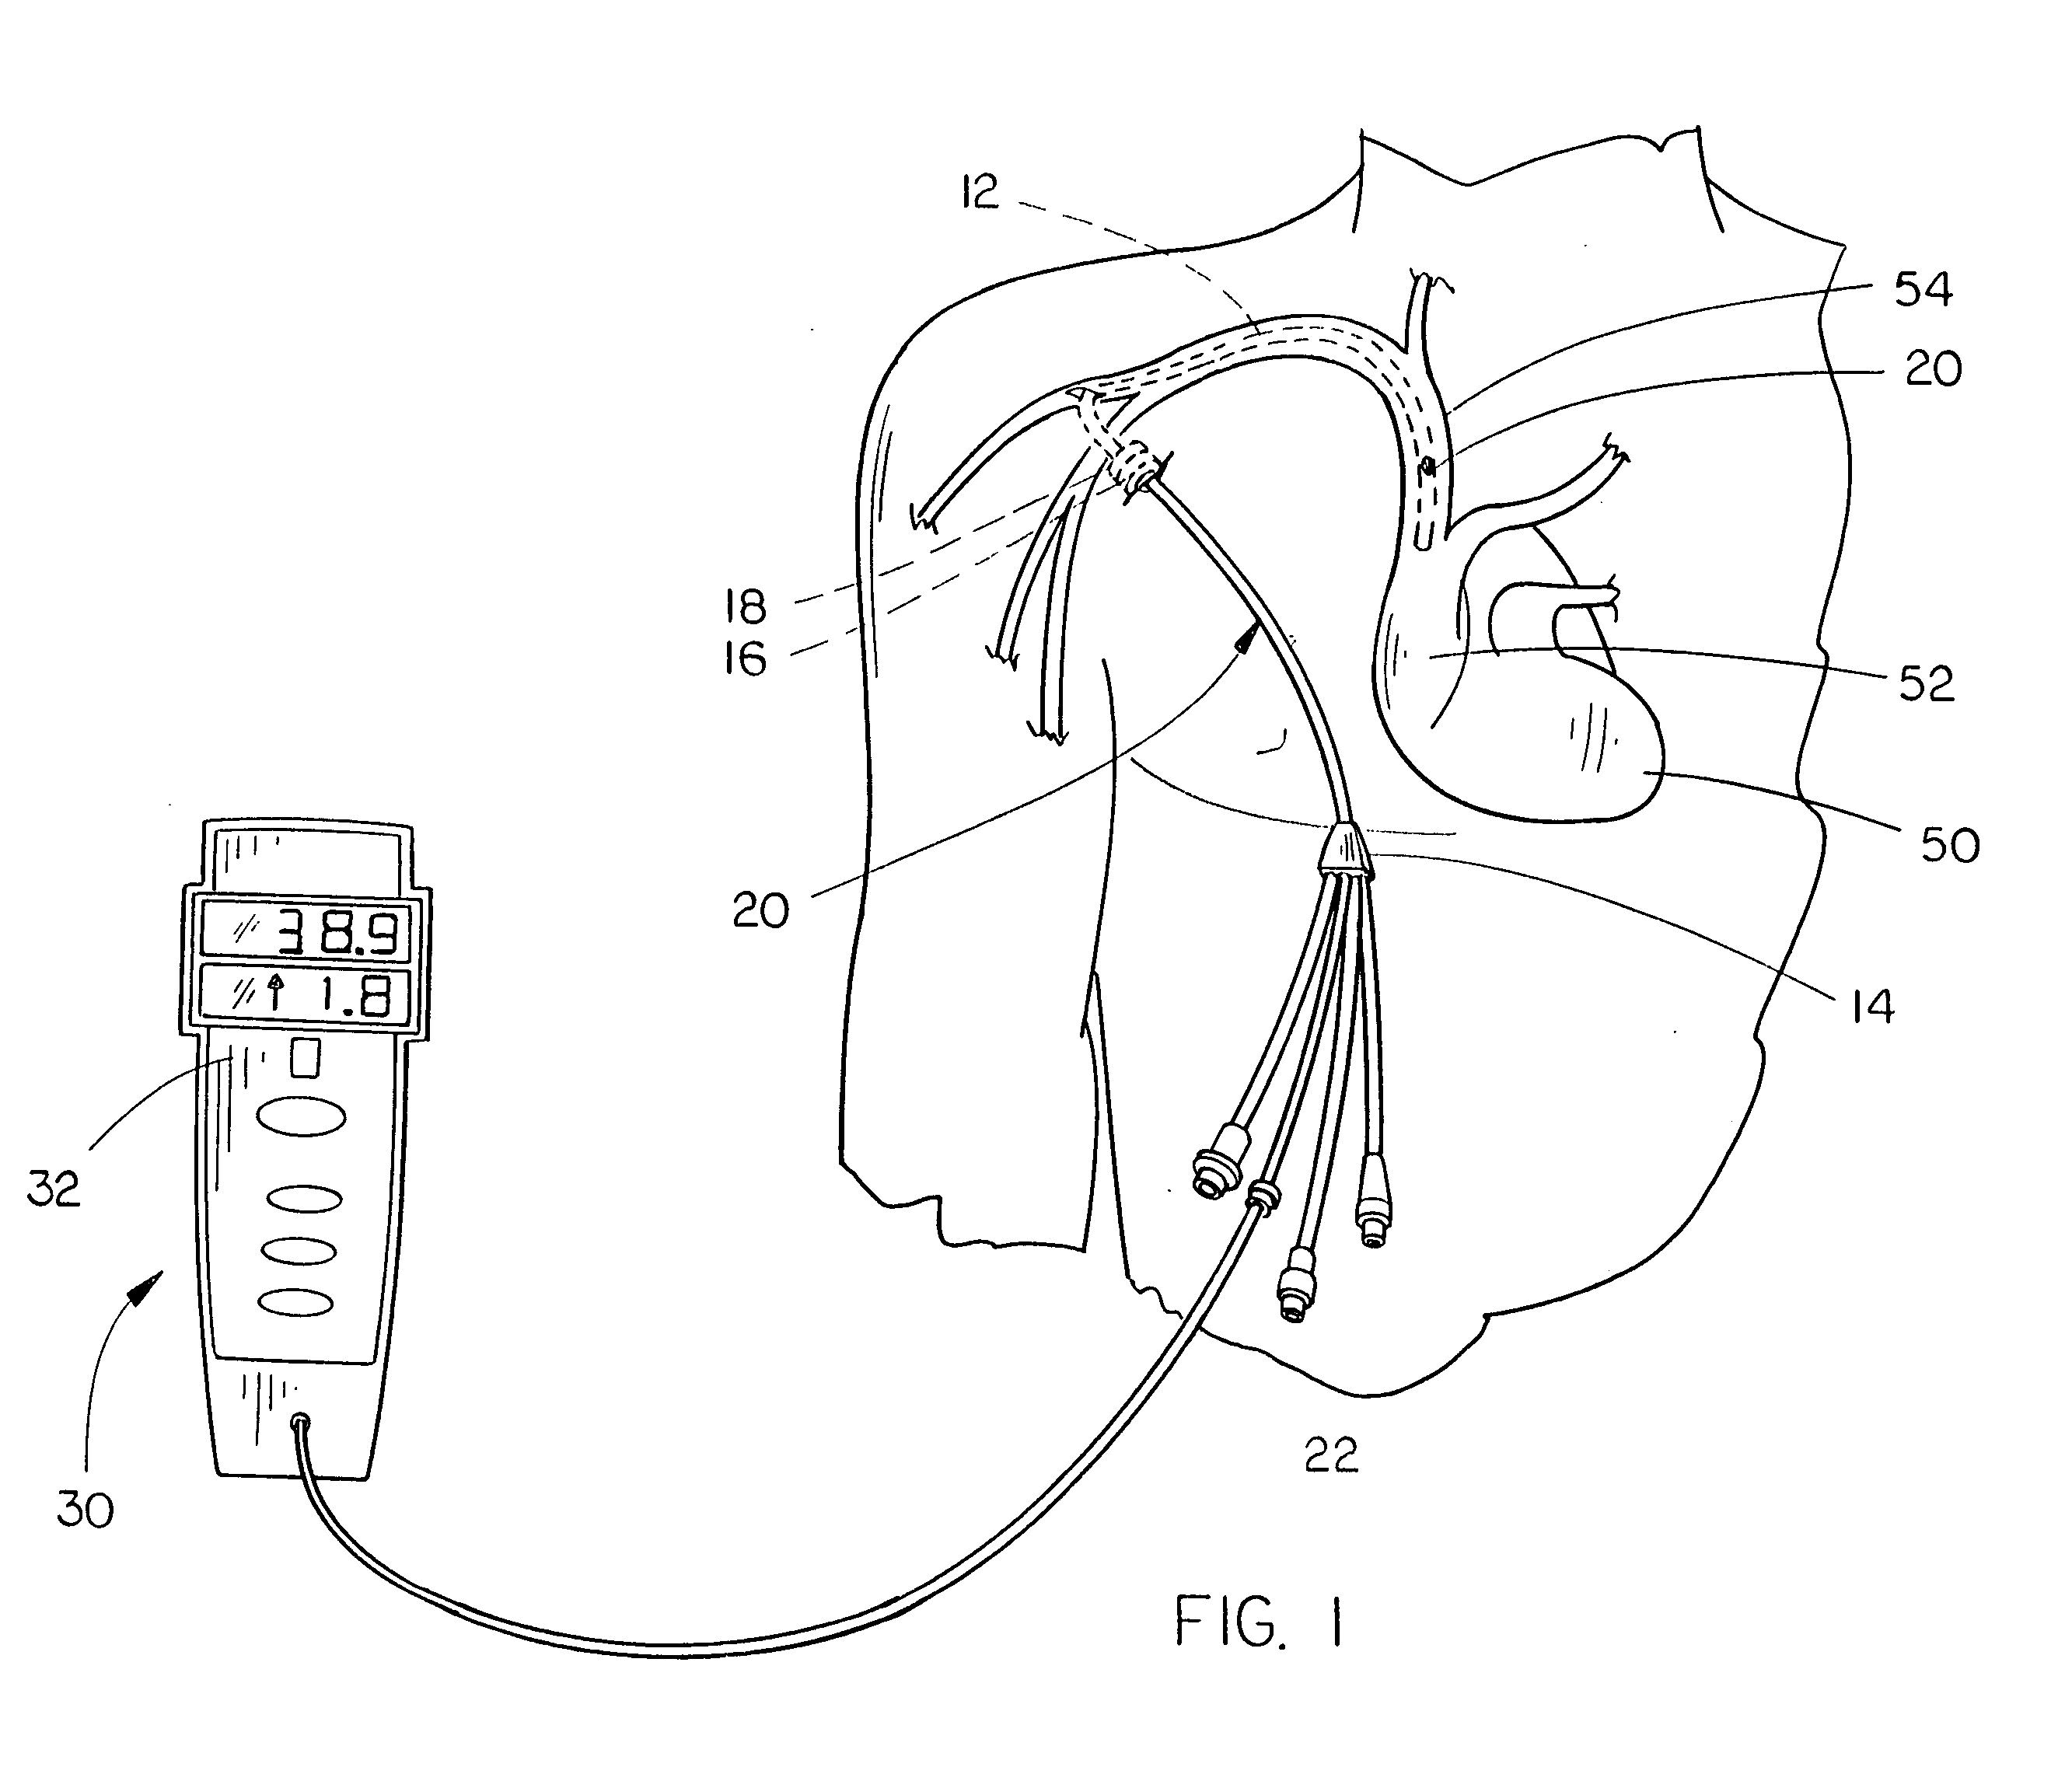 Modified hickman-type catheter with embedded thermistor